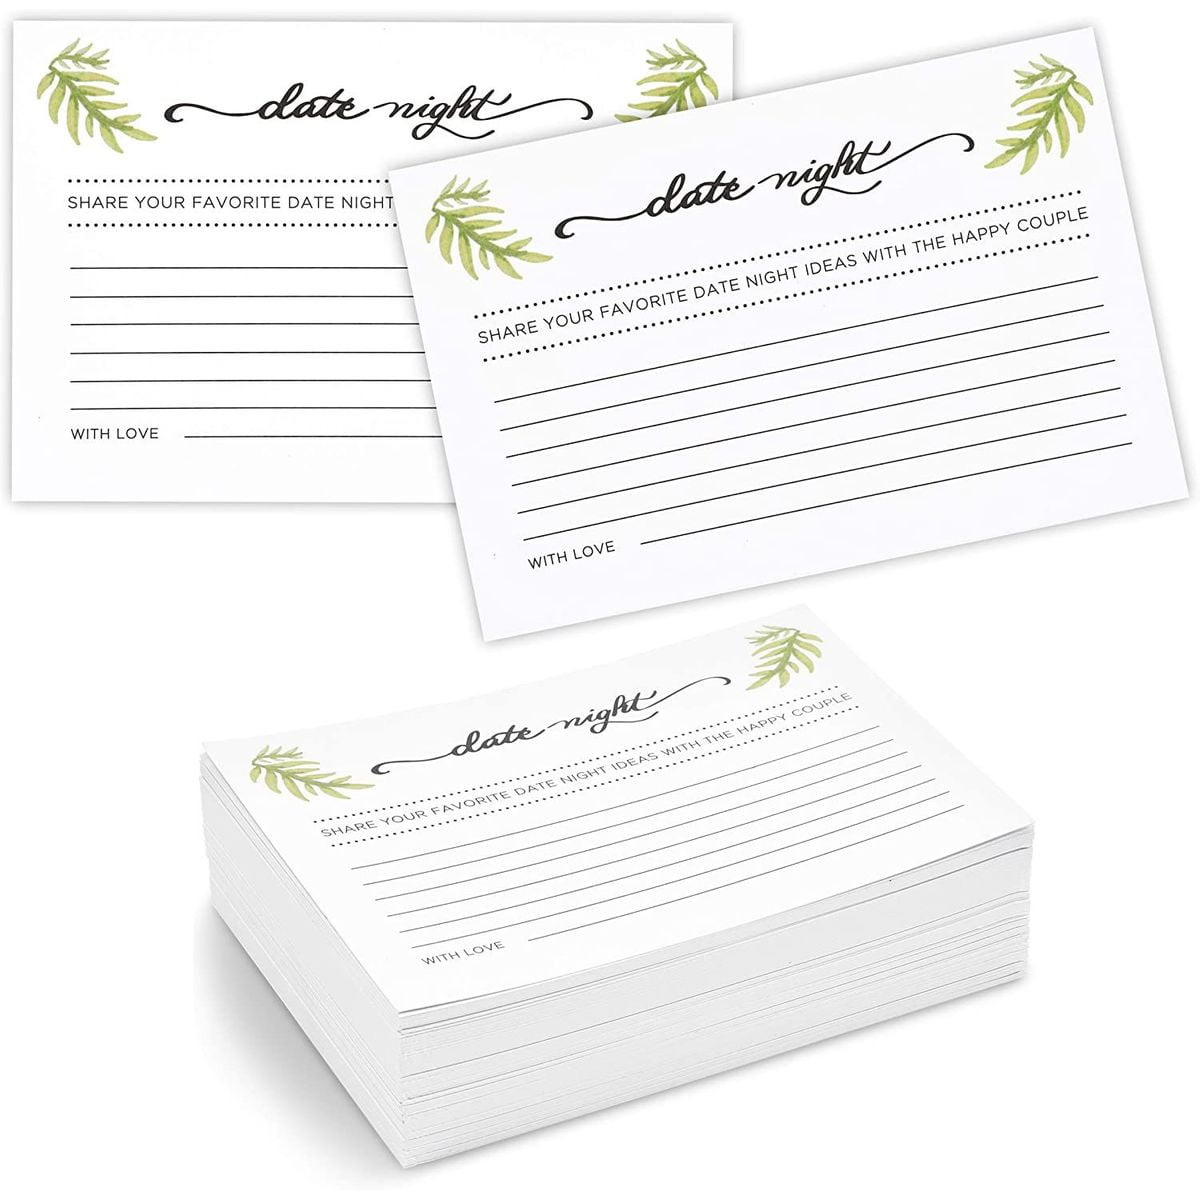 100-pack-date-night-idea-cards-for-bridal-shower-wedding-bride-and